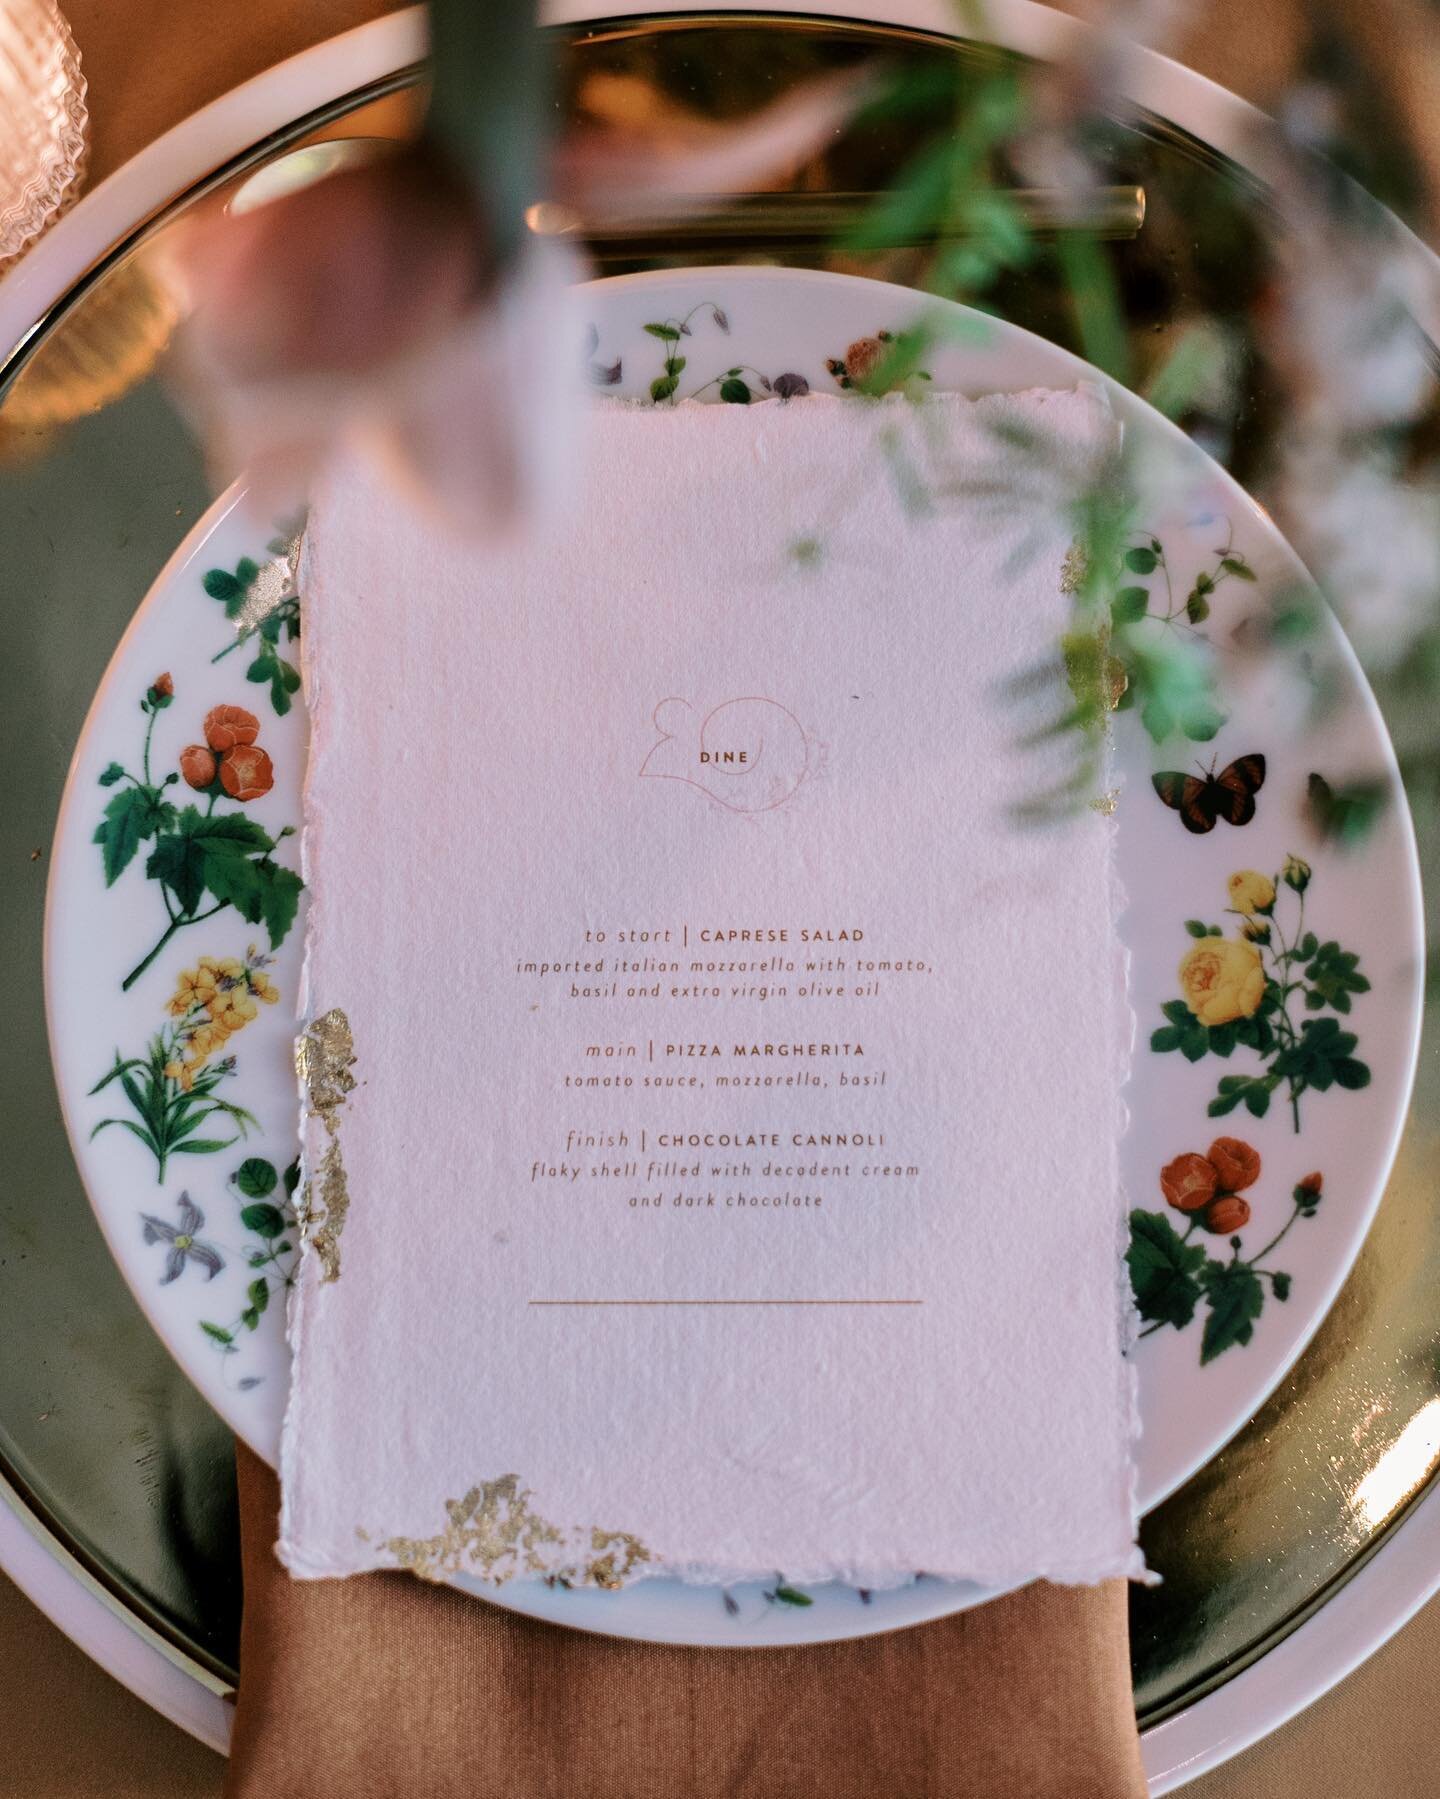 The table is set. 

These delicate flower plates from @thetabletopcompany are ever so perfect for our floral tabletop setting. 

Thank you @designsbyahnnyc for giving us the floral fantasies of our fairytale dreams. 

Captured by the talented @alicea